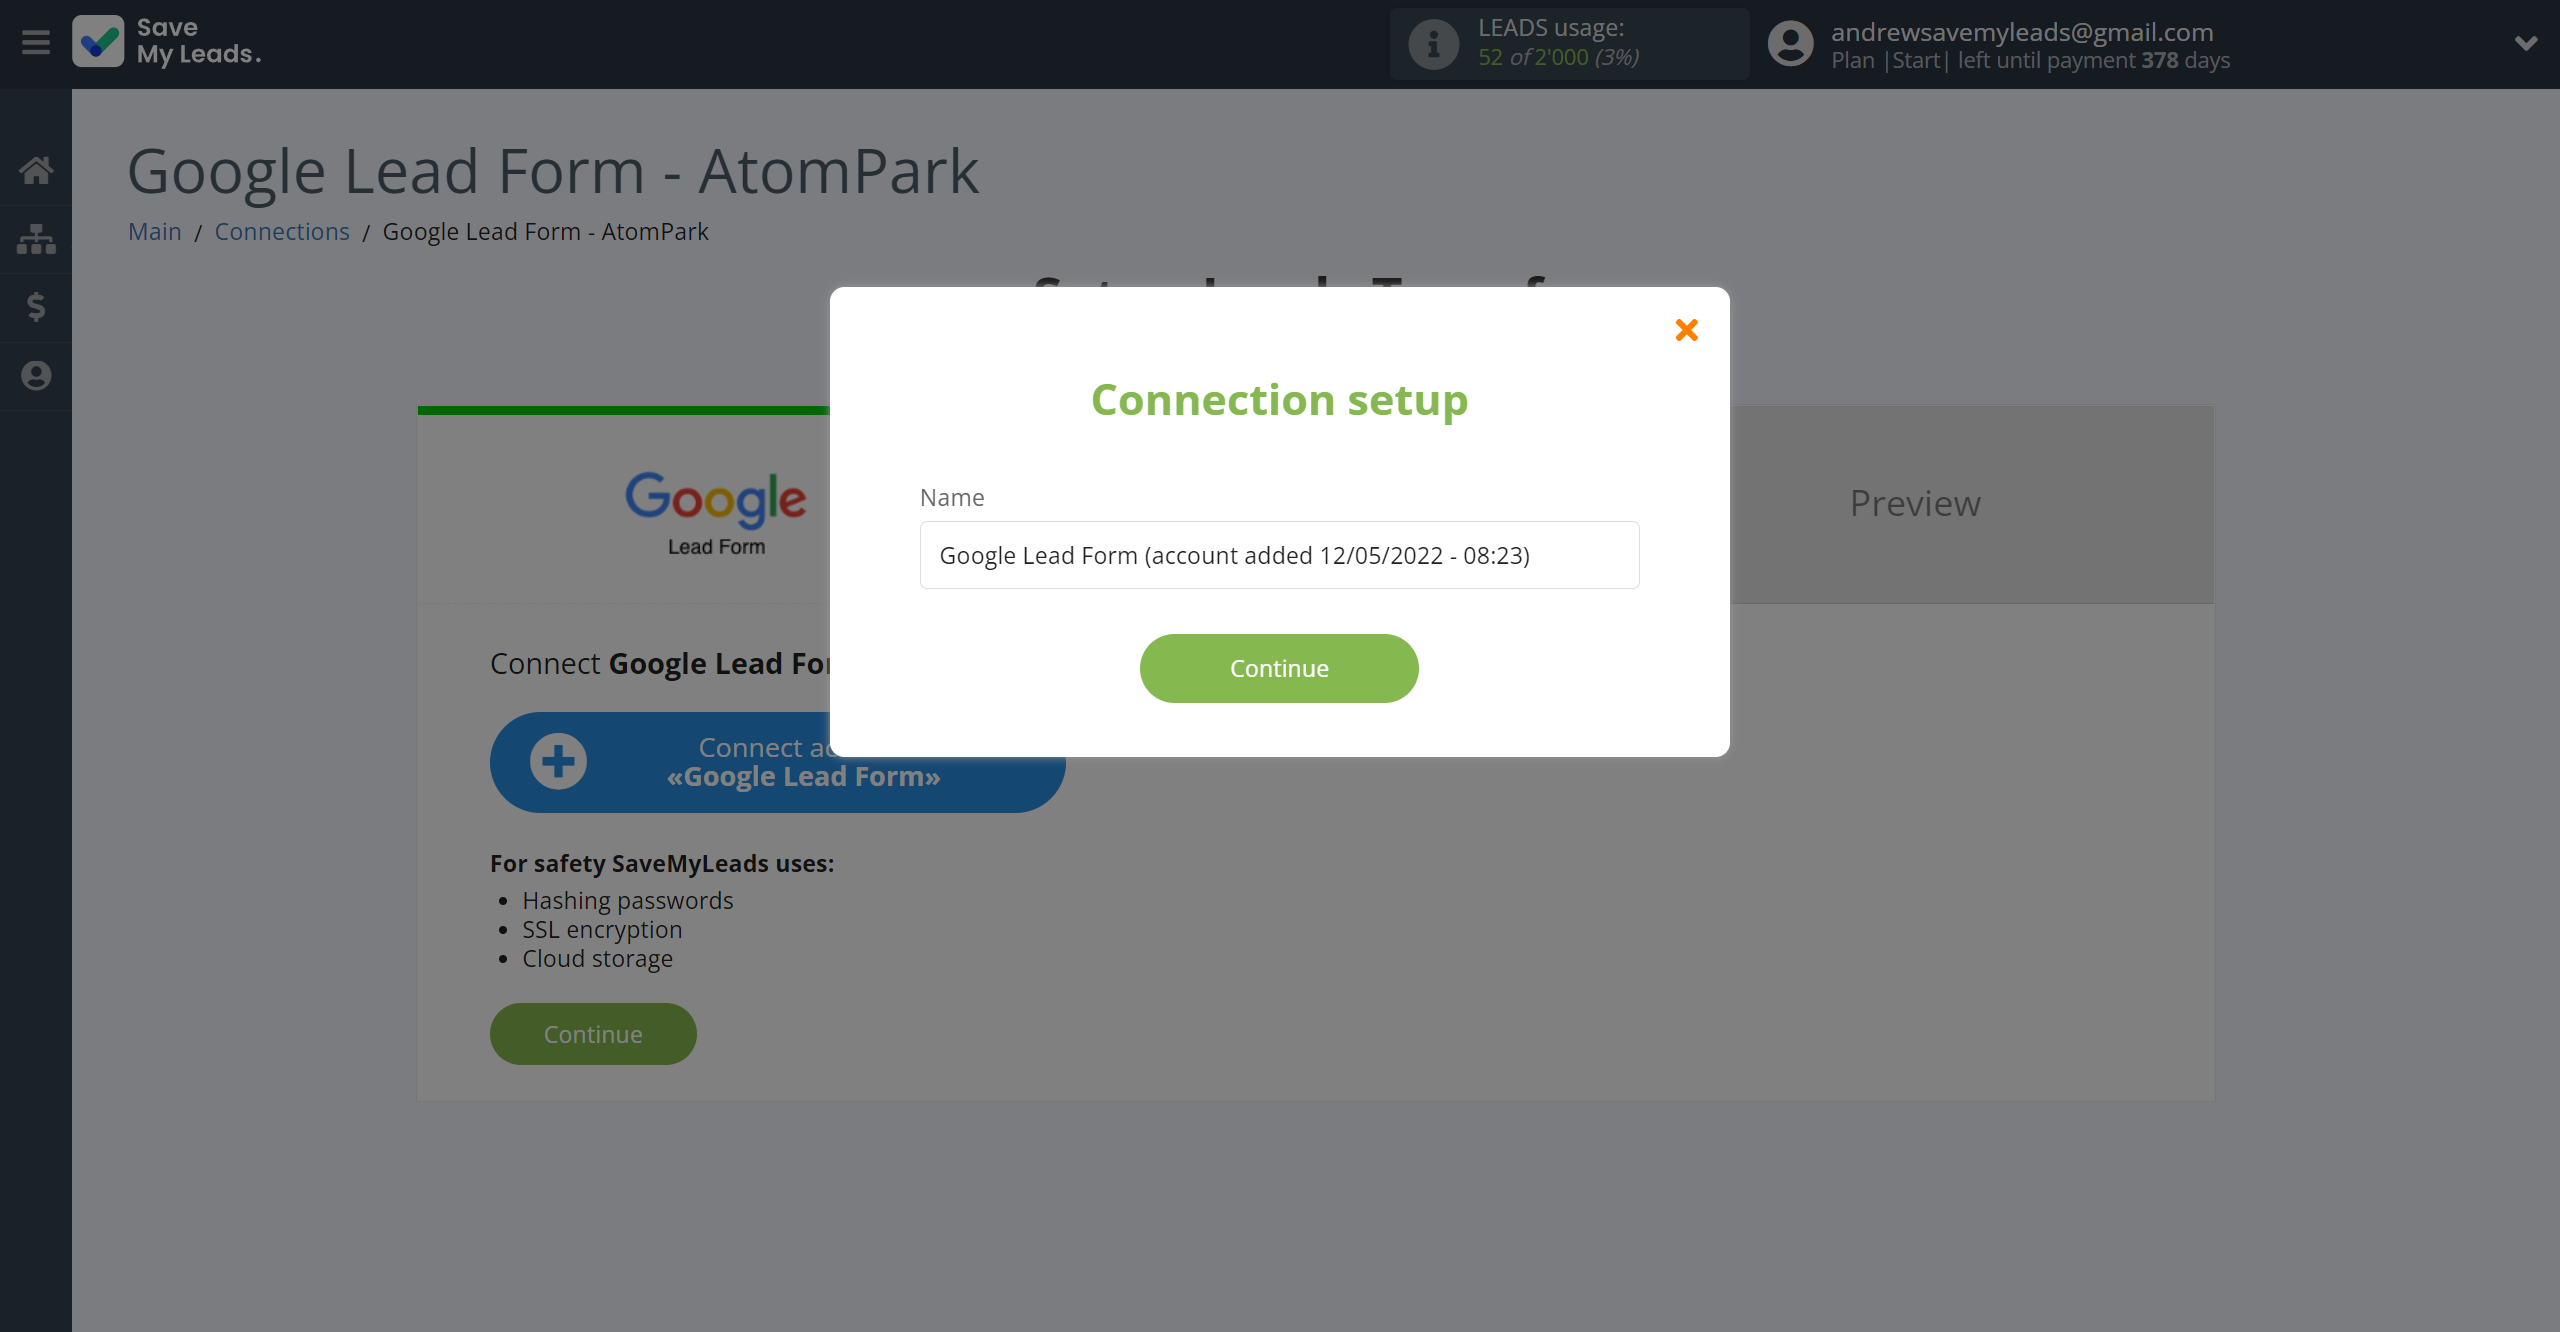 How to Connect Google Lead Form with AtomPark | Data Source account connection